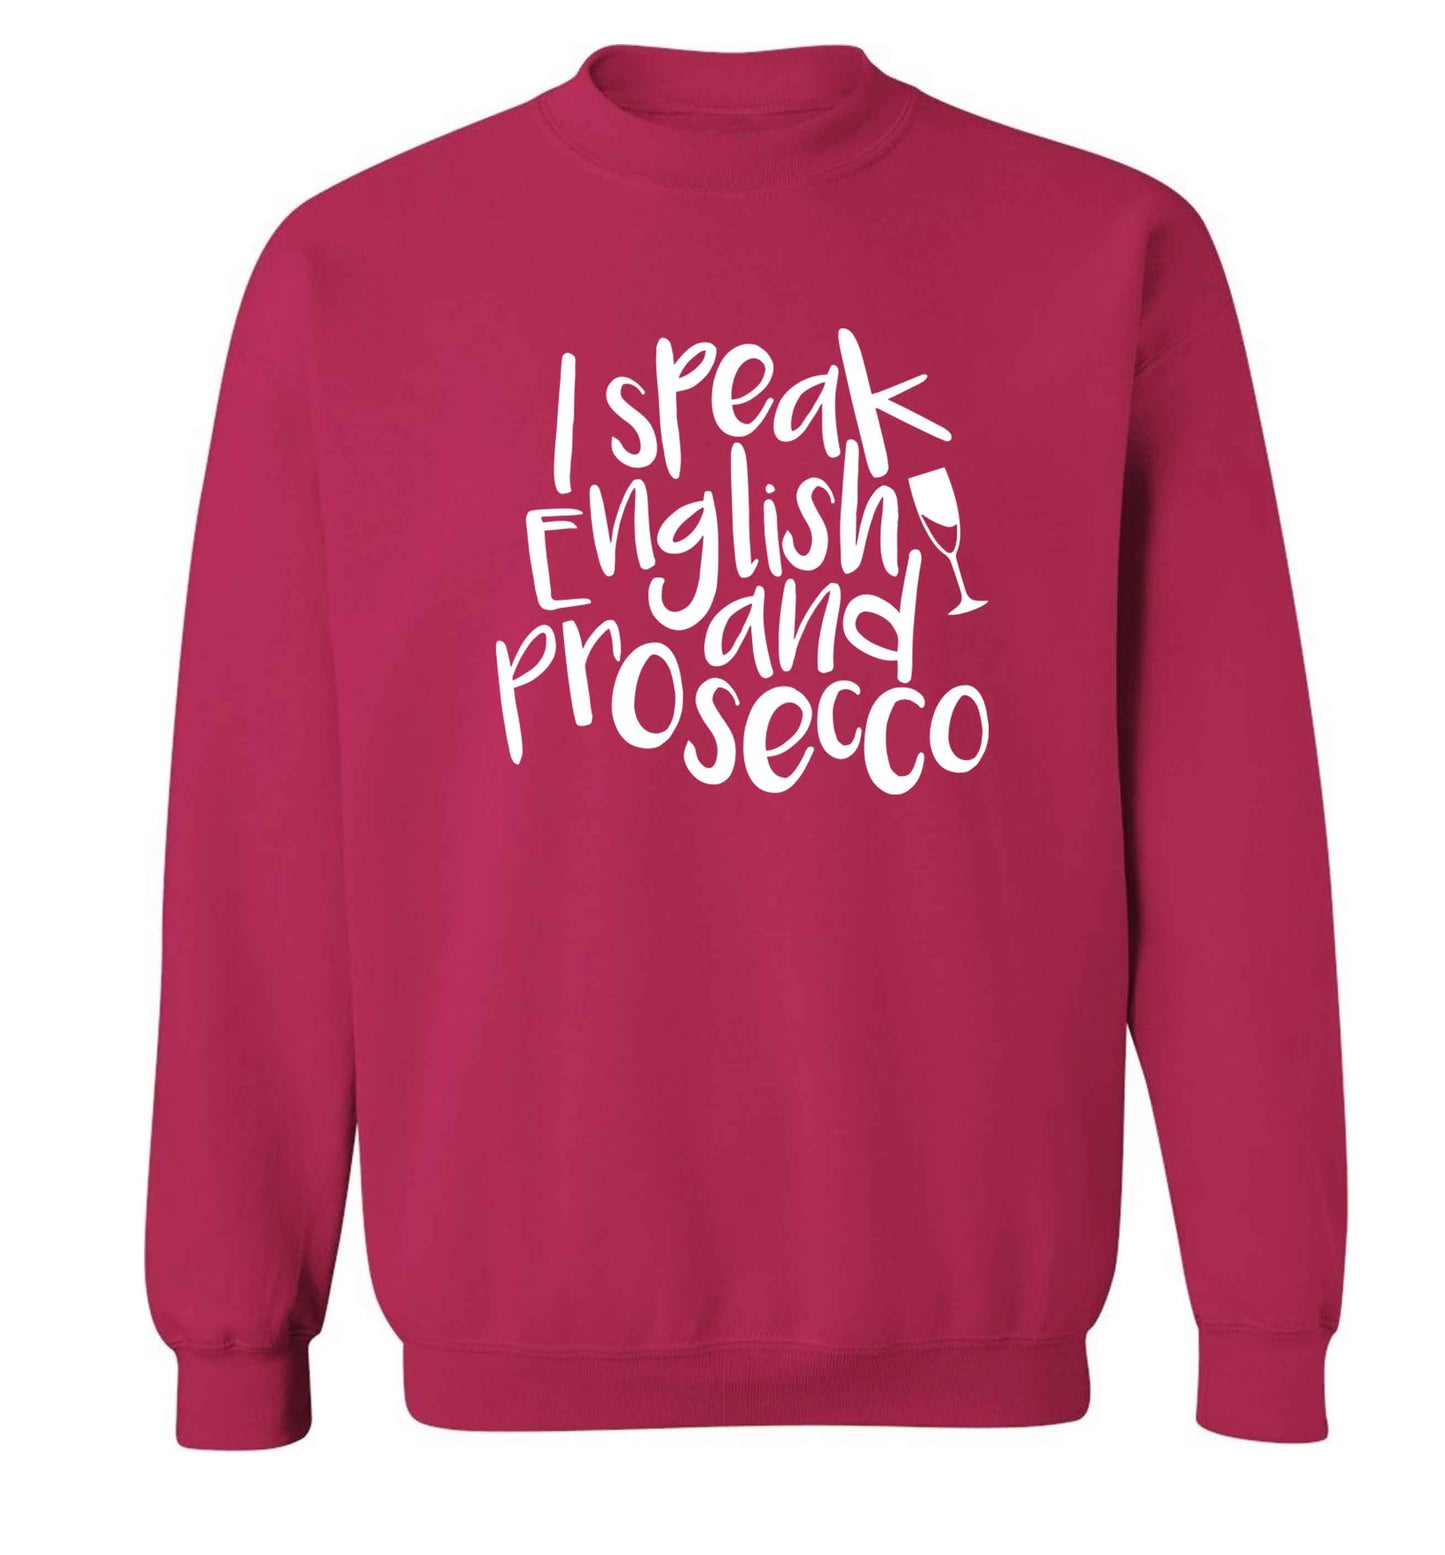 I speak English and prosecco Adult's unisex pink Sweater 2XL